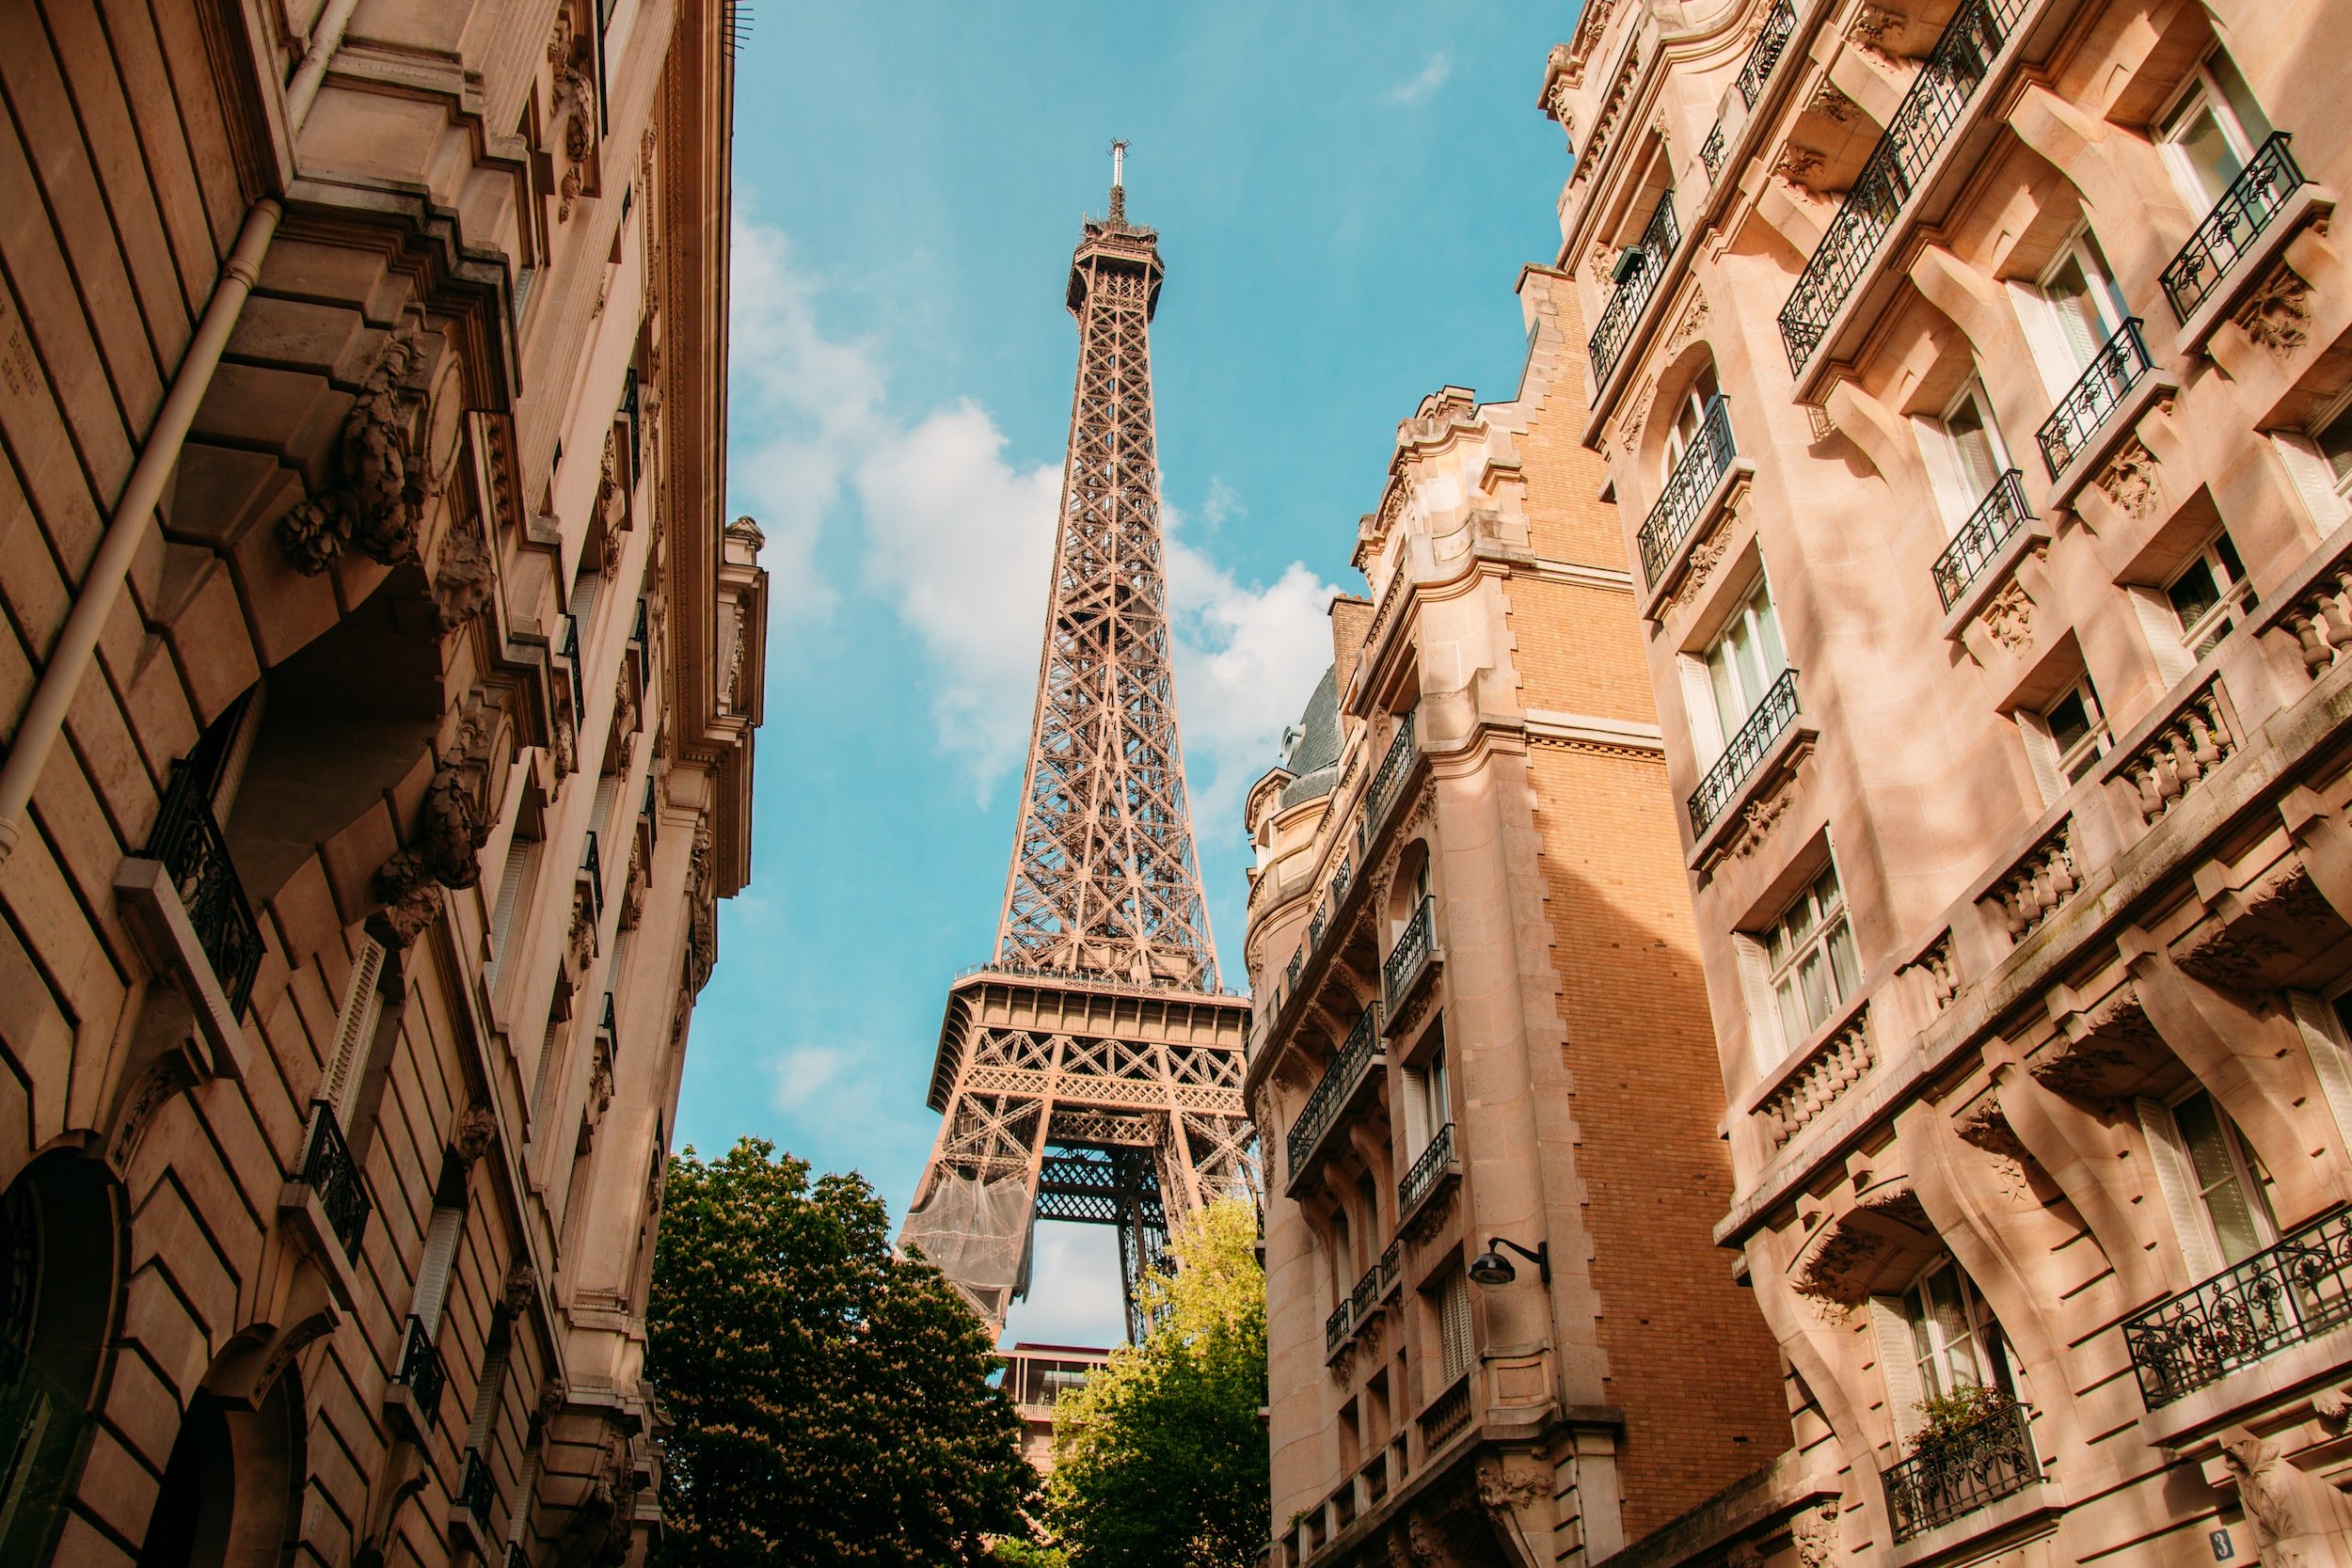 Visit the Eiffel Tower during your stay in an exceptional apartment